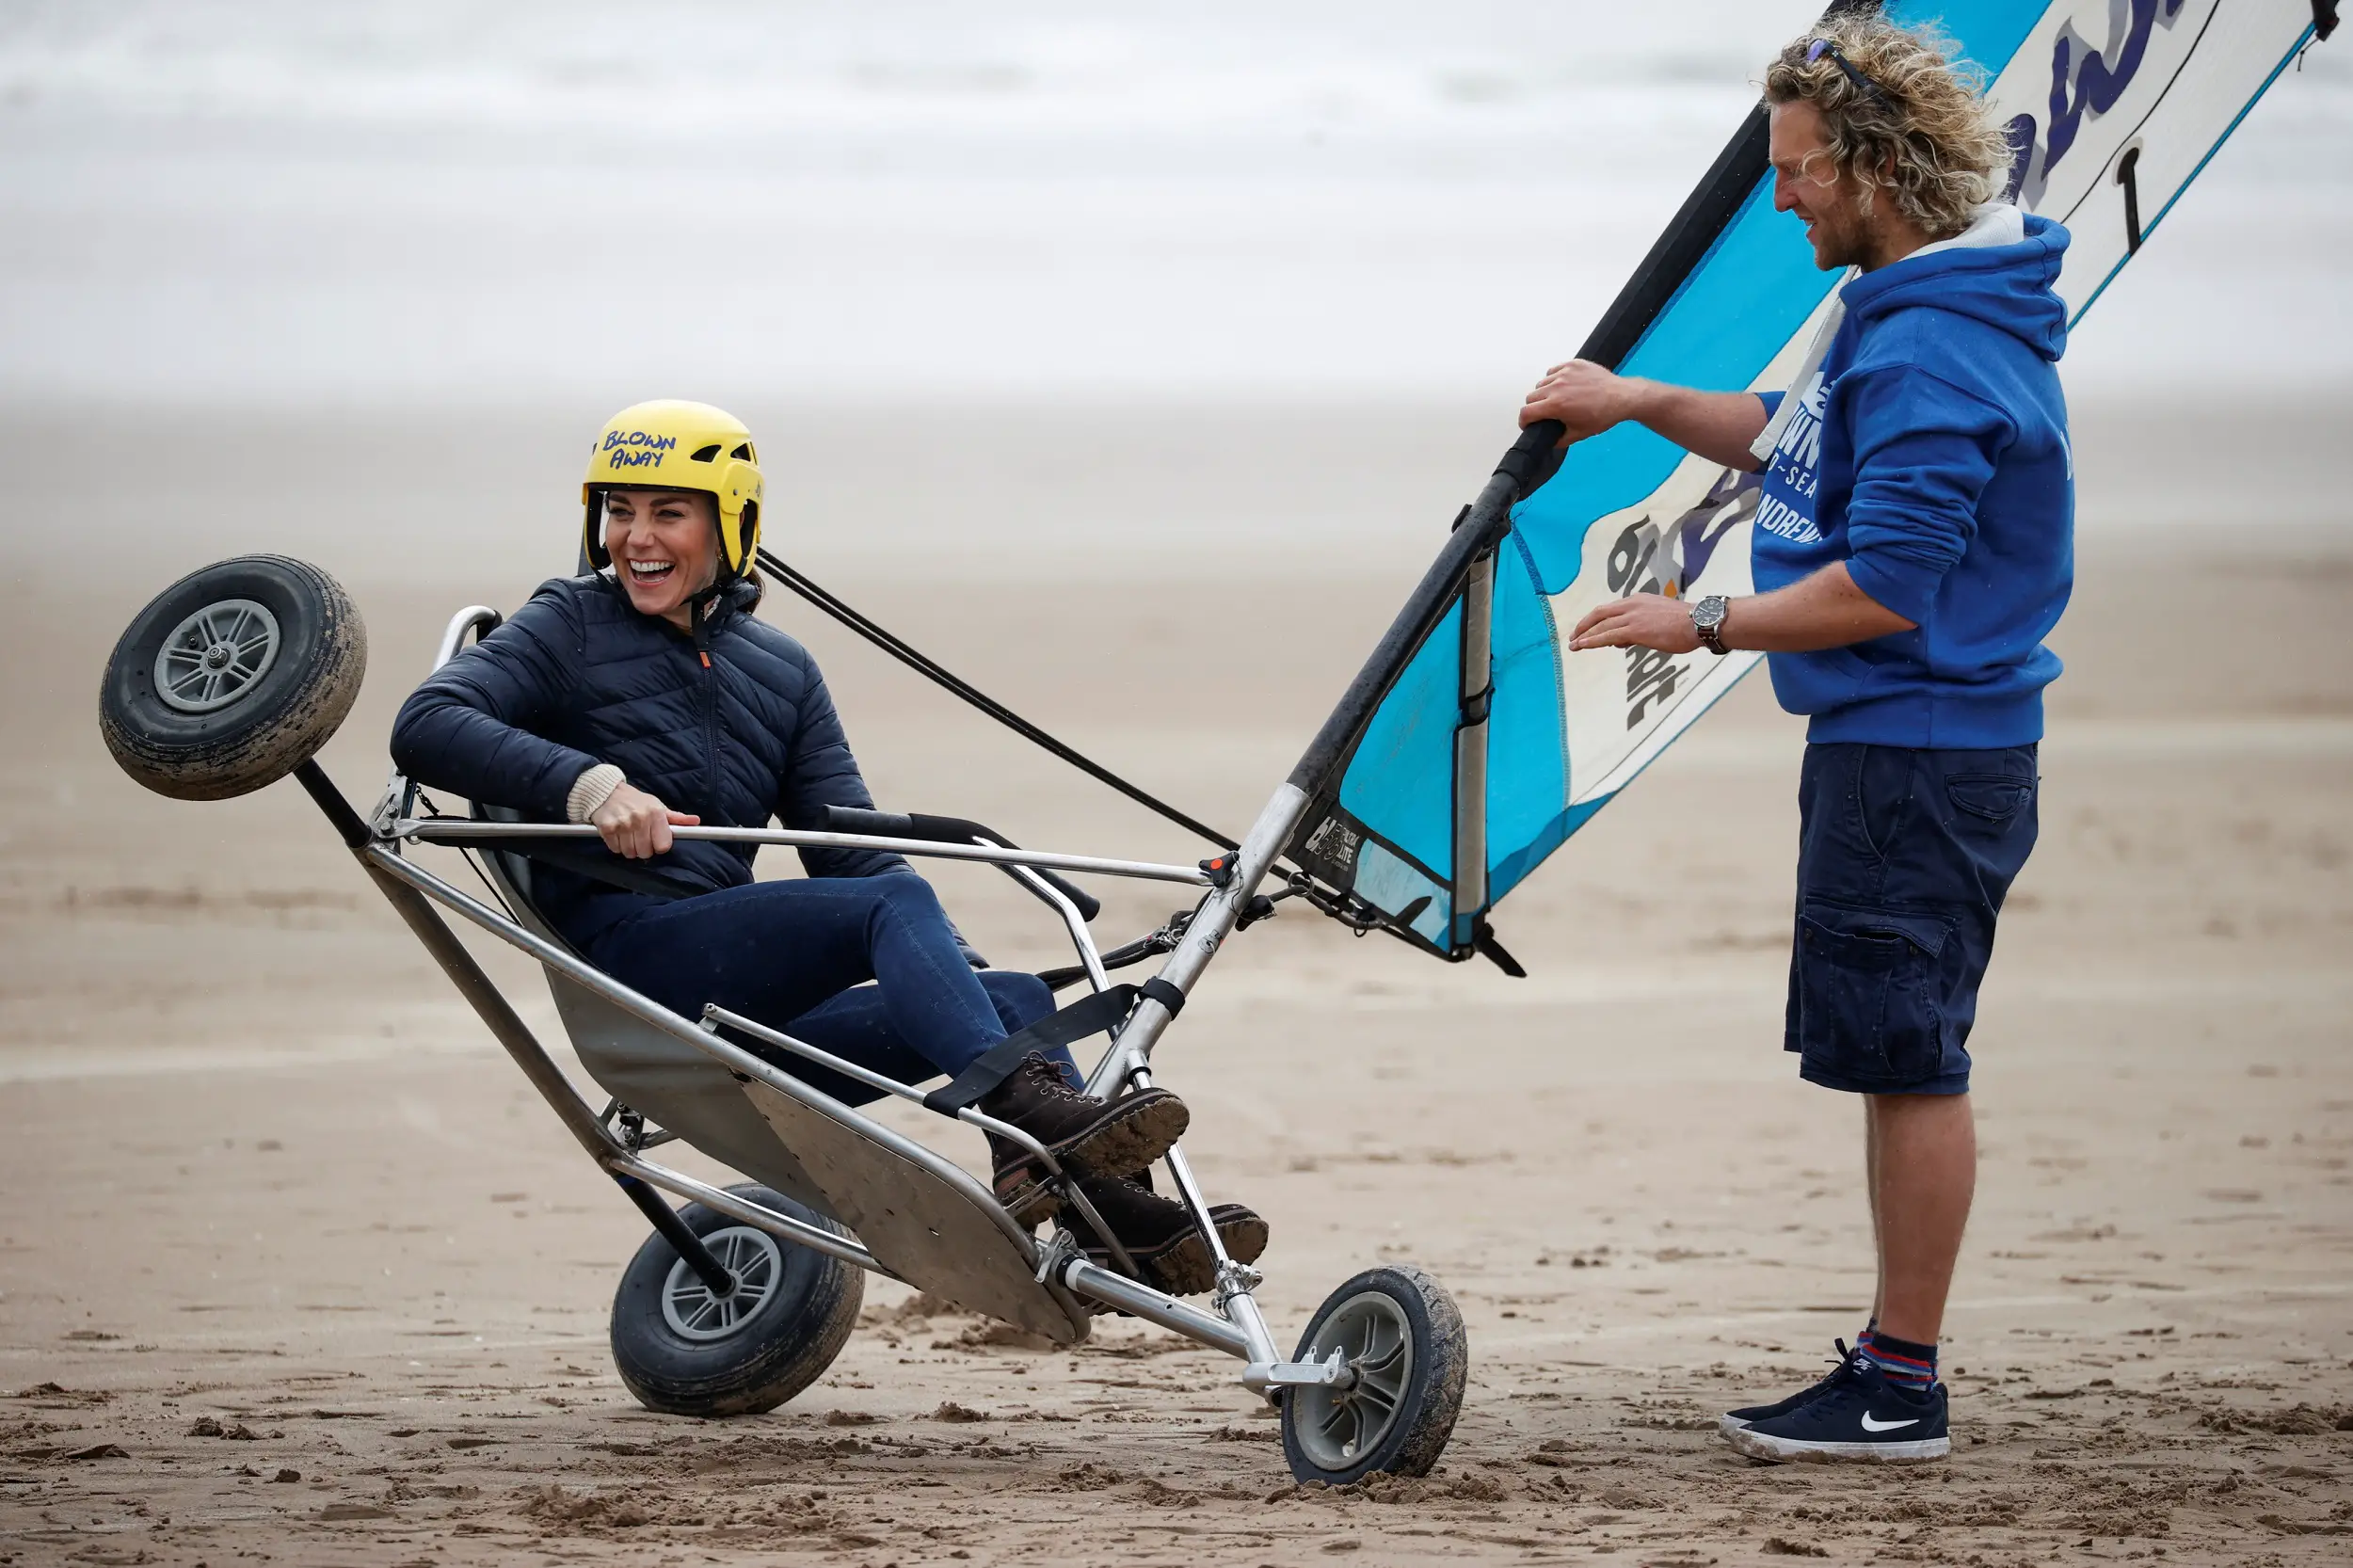 The couple performed figures of eight in the wind-powered buggies on the West Sands beach at the coastal Scottish town